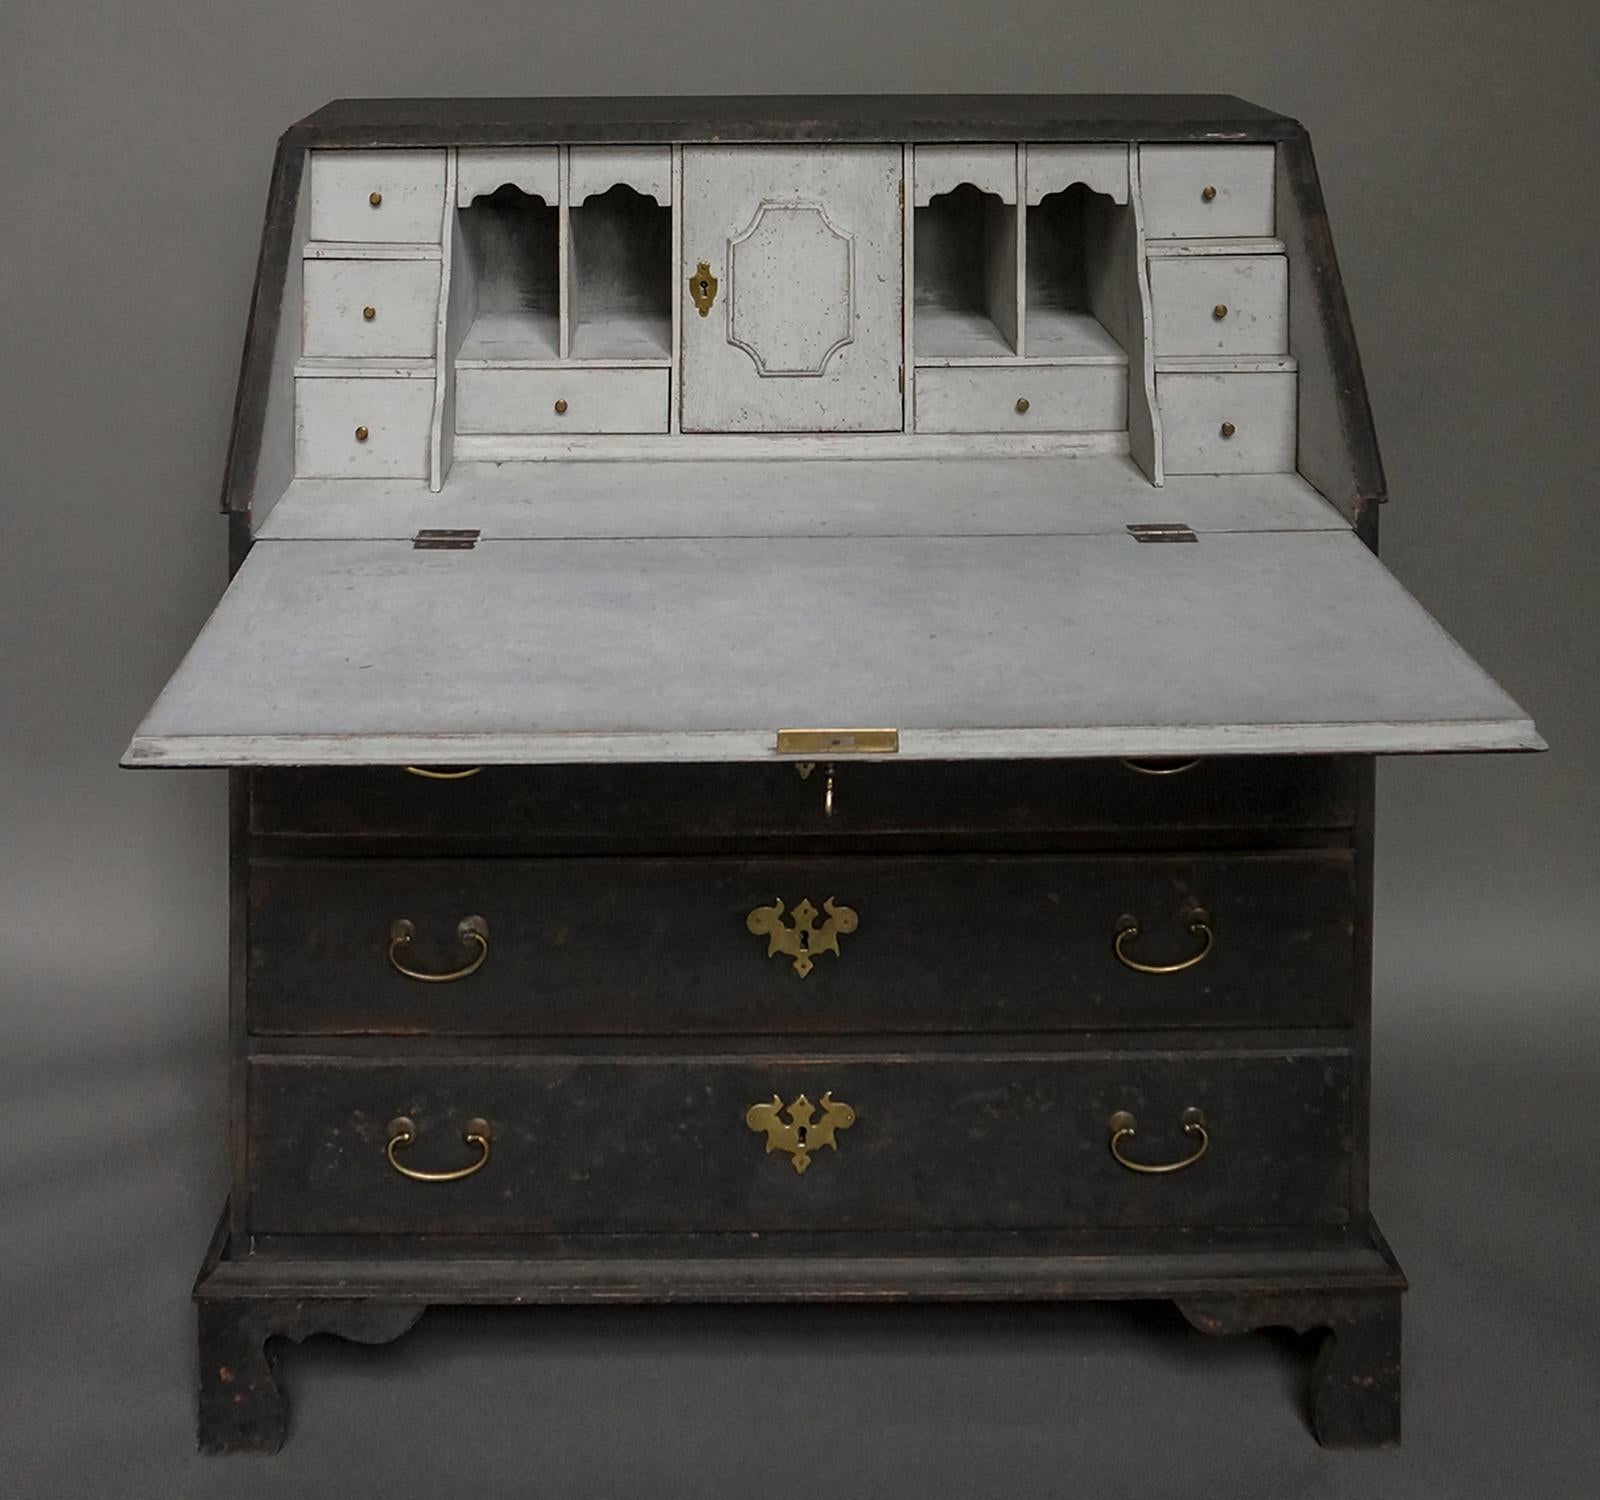 Period Swedish slant-front desk with fitted interior, circa 1820. Under the writing surface are three full-width locking drawers with a smaller pencil drawer at the top. Shaped bracket base.